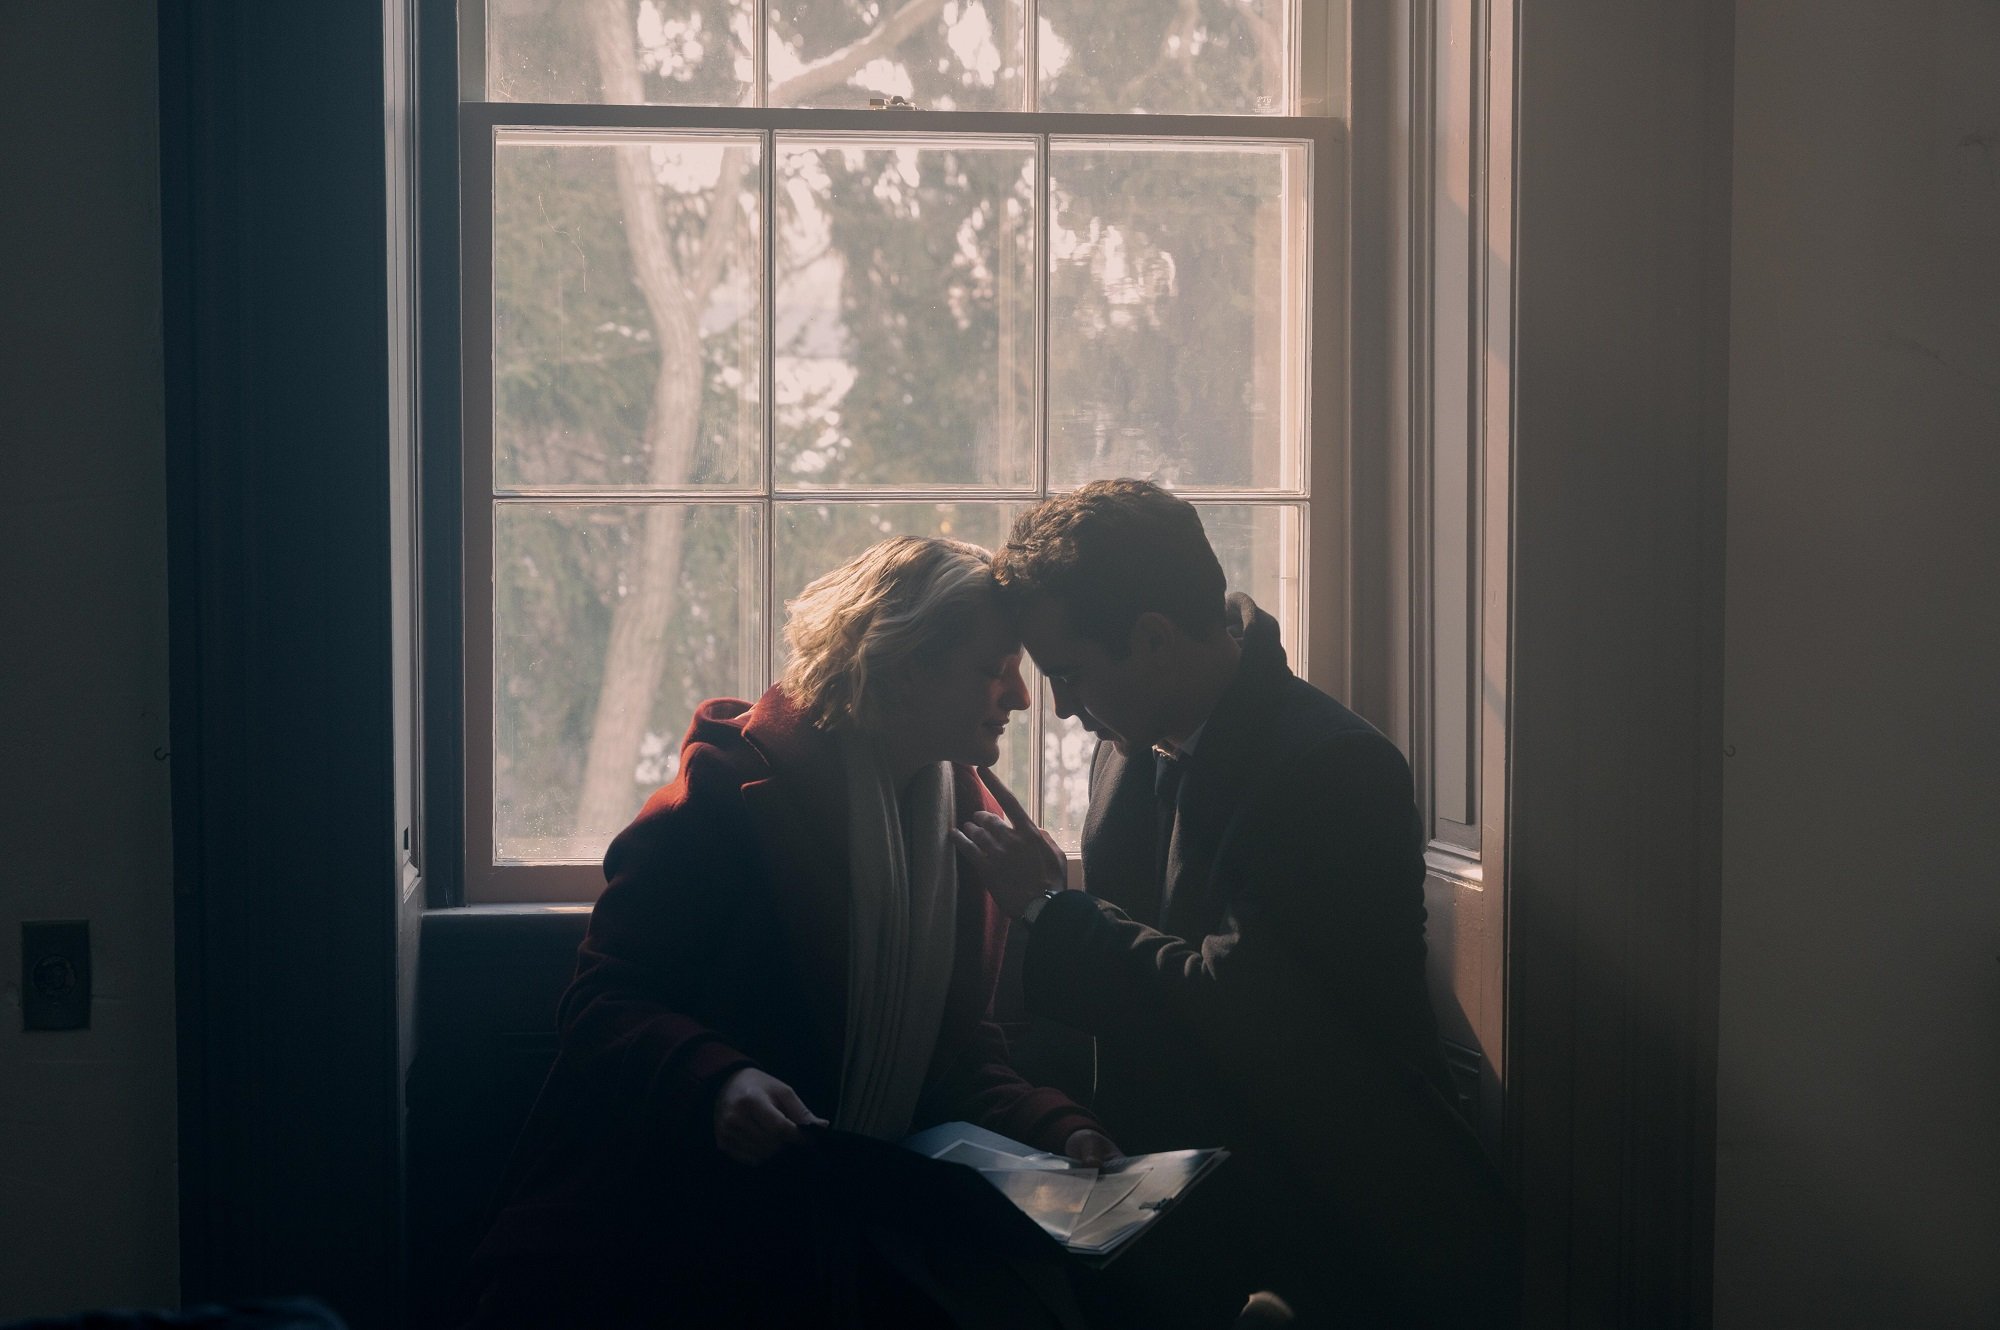 June and Nick touch foreheads while sitting on a window sill in 'The Handmaid's Tale'